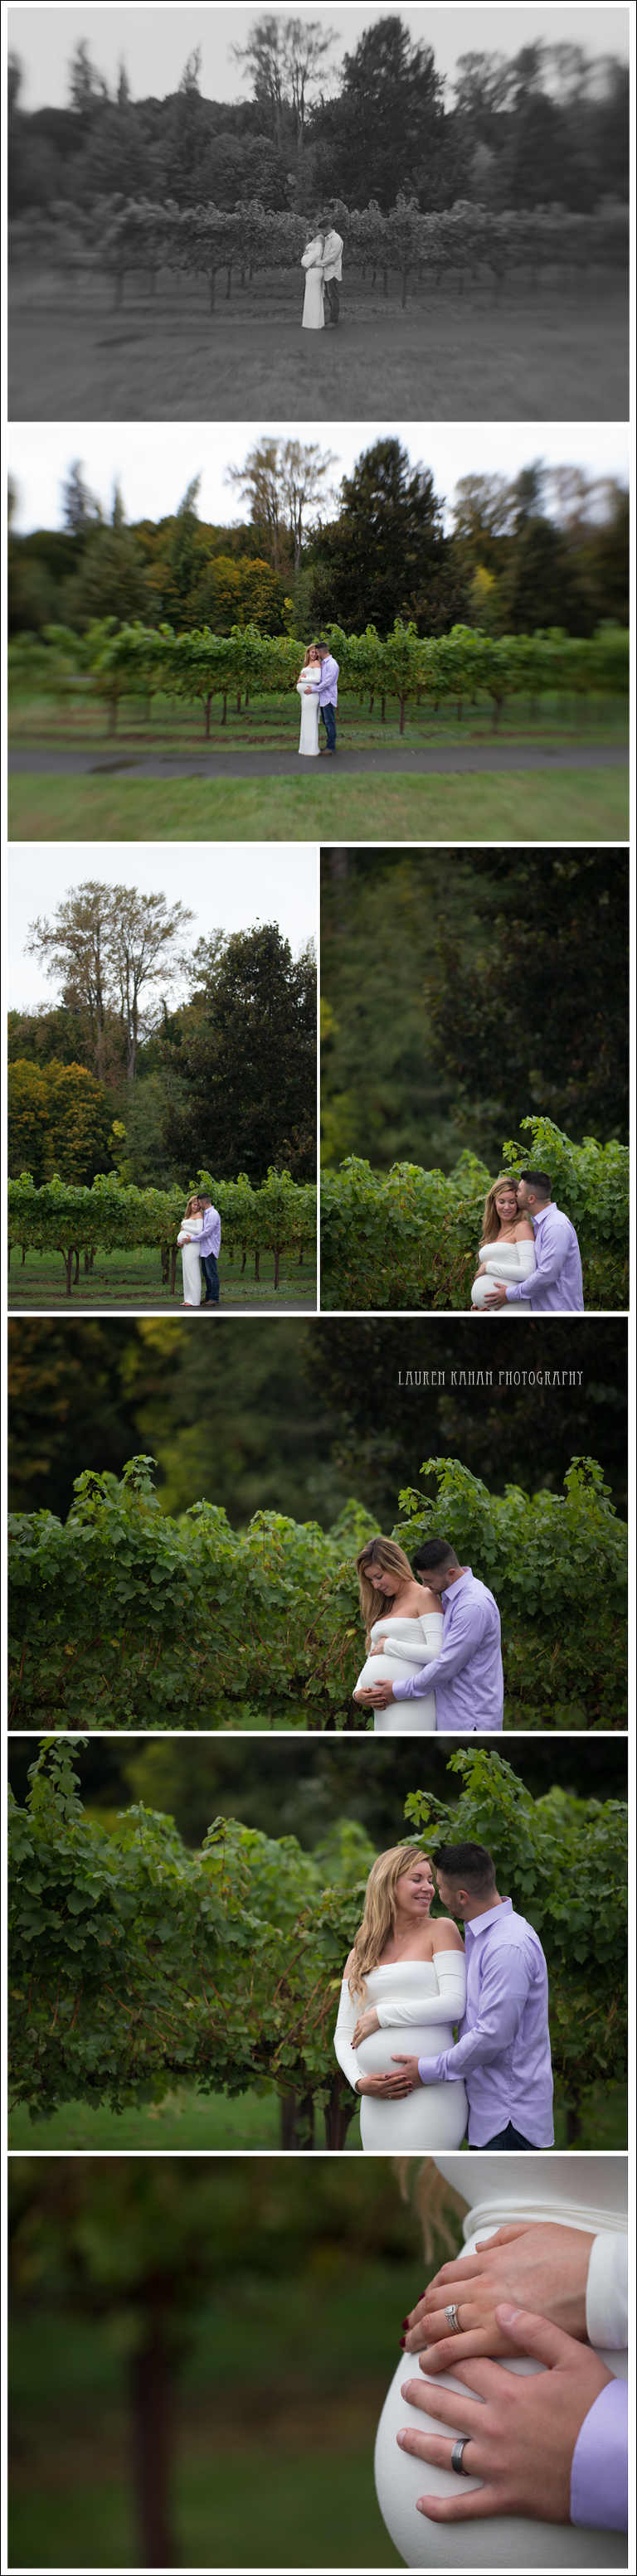 blog-chateau-ste-michelle-winery-maternity-session-4